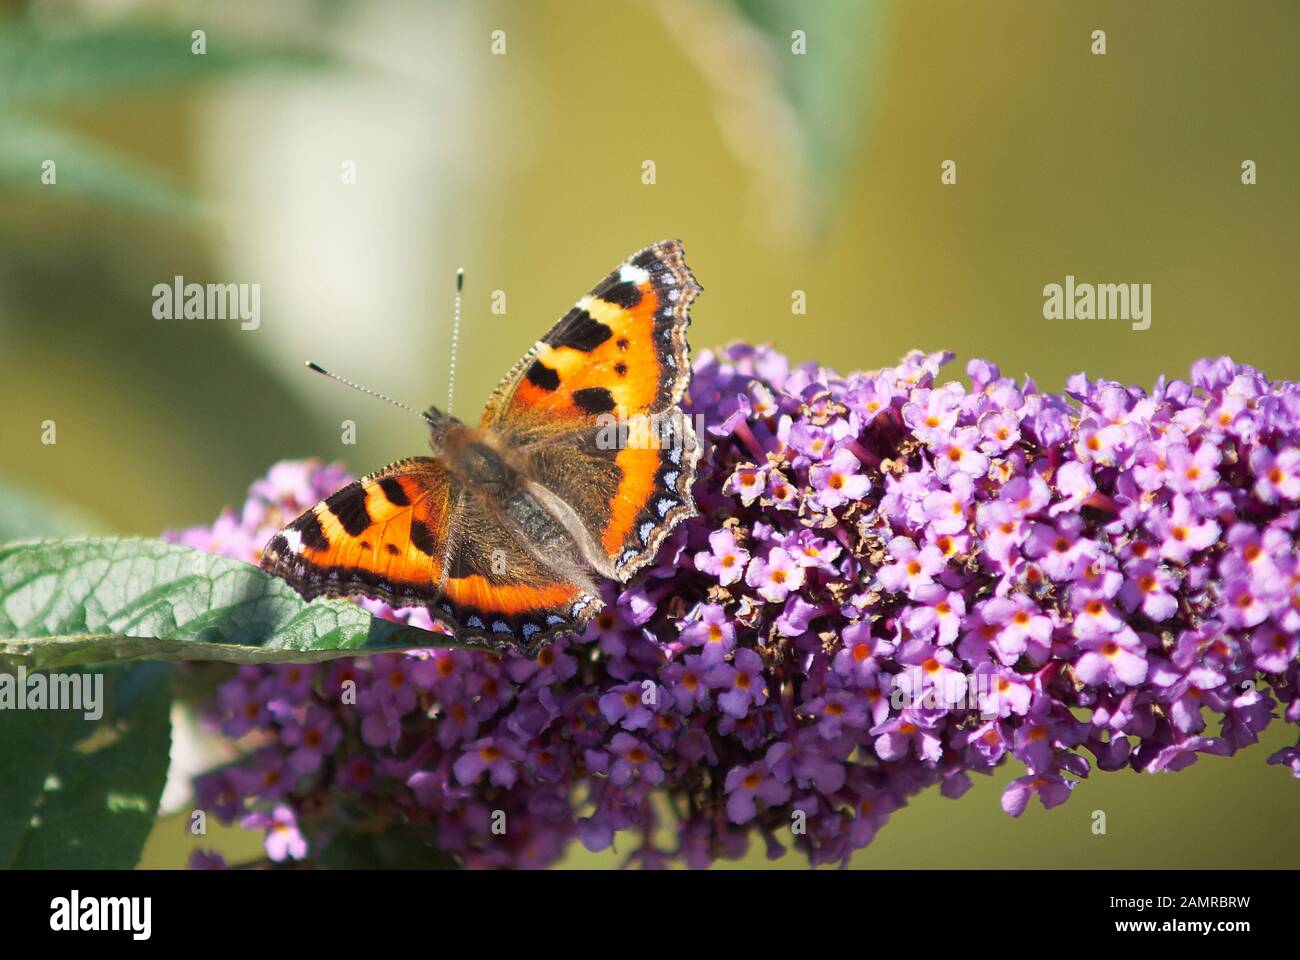 Red Admiral butterfly feasting on a Buddleia plant in front of a blurred, green background Stock Photo